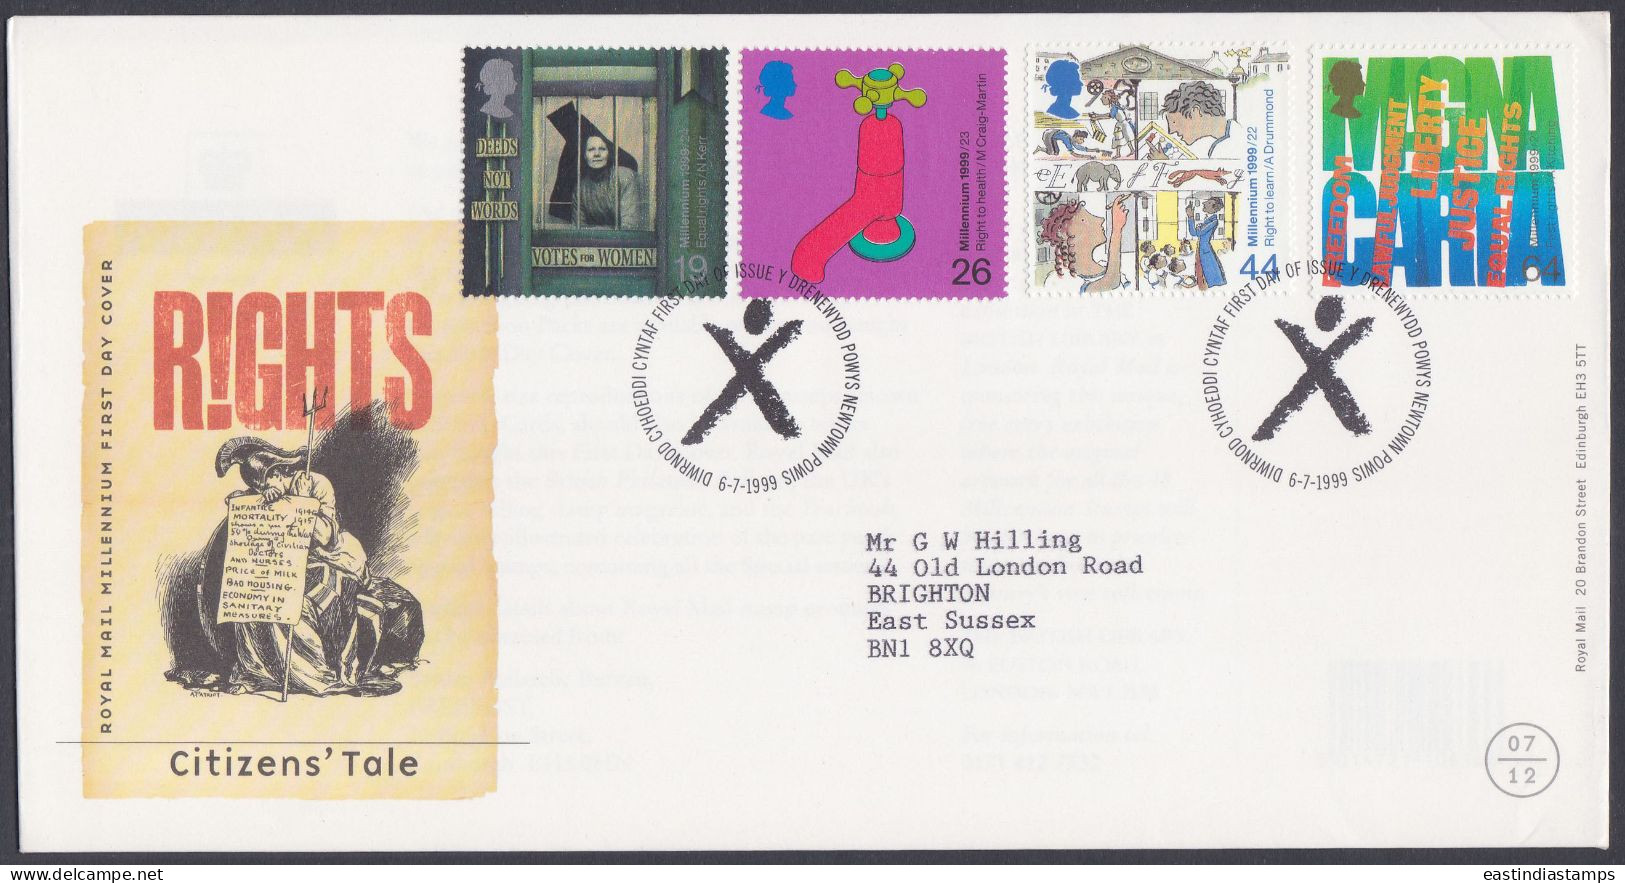 GB Great Britain 1999 FDC Citizens' Tale, Women's Right, Universal Franchise, Rights Pictorial Postmark, First Day Cover - Covers & Documents